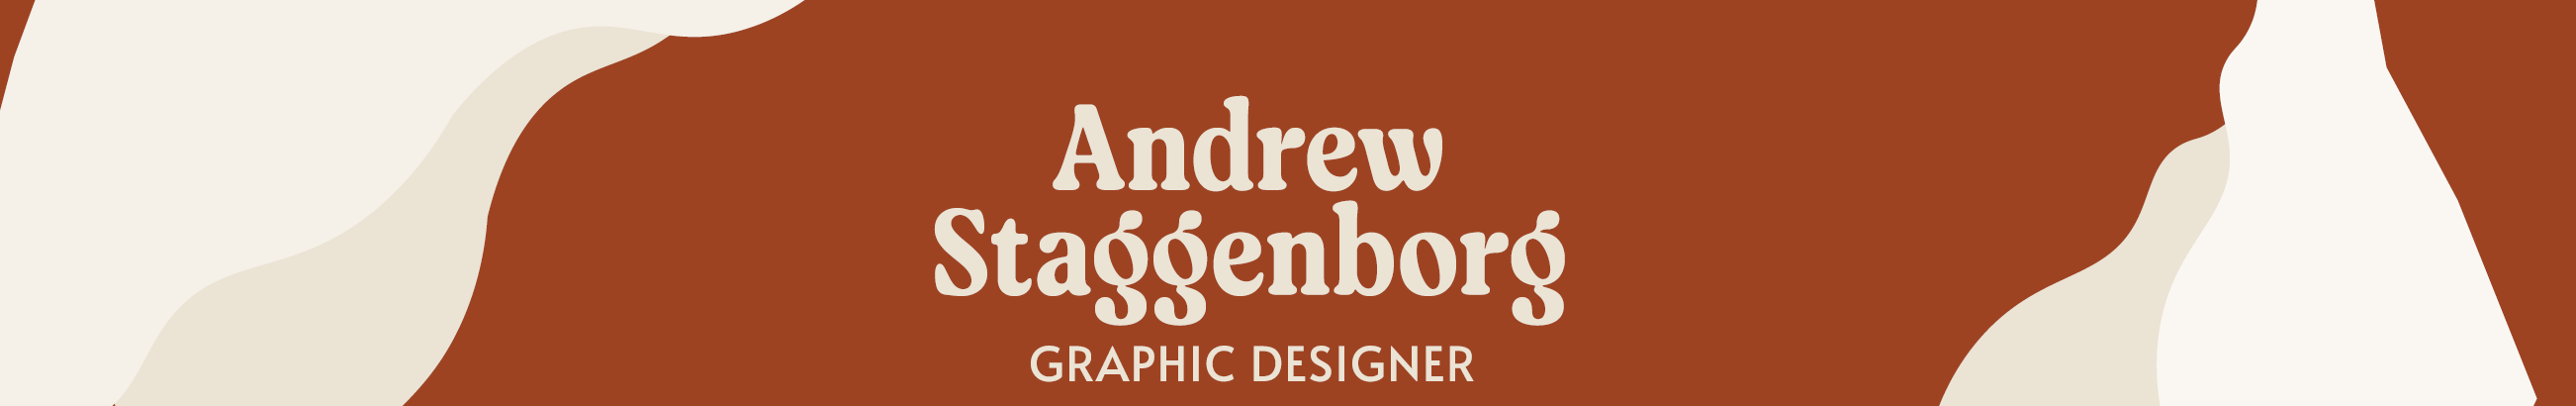 Andrew Staggenborgs profilbanner